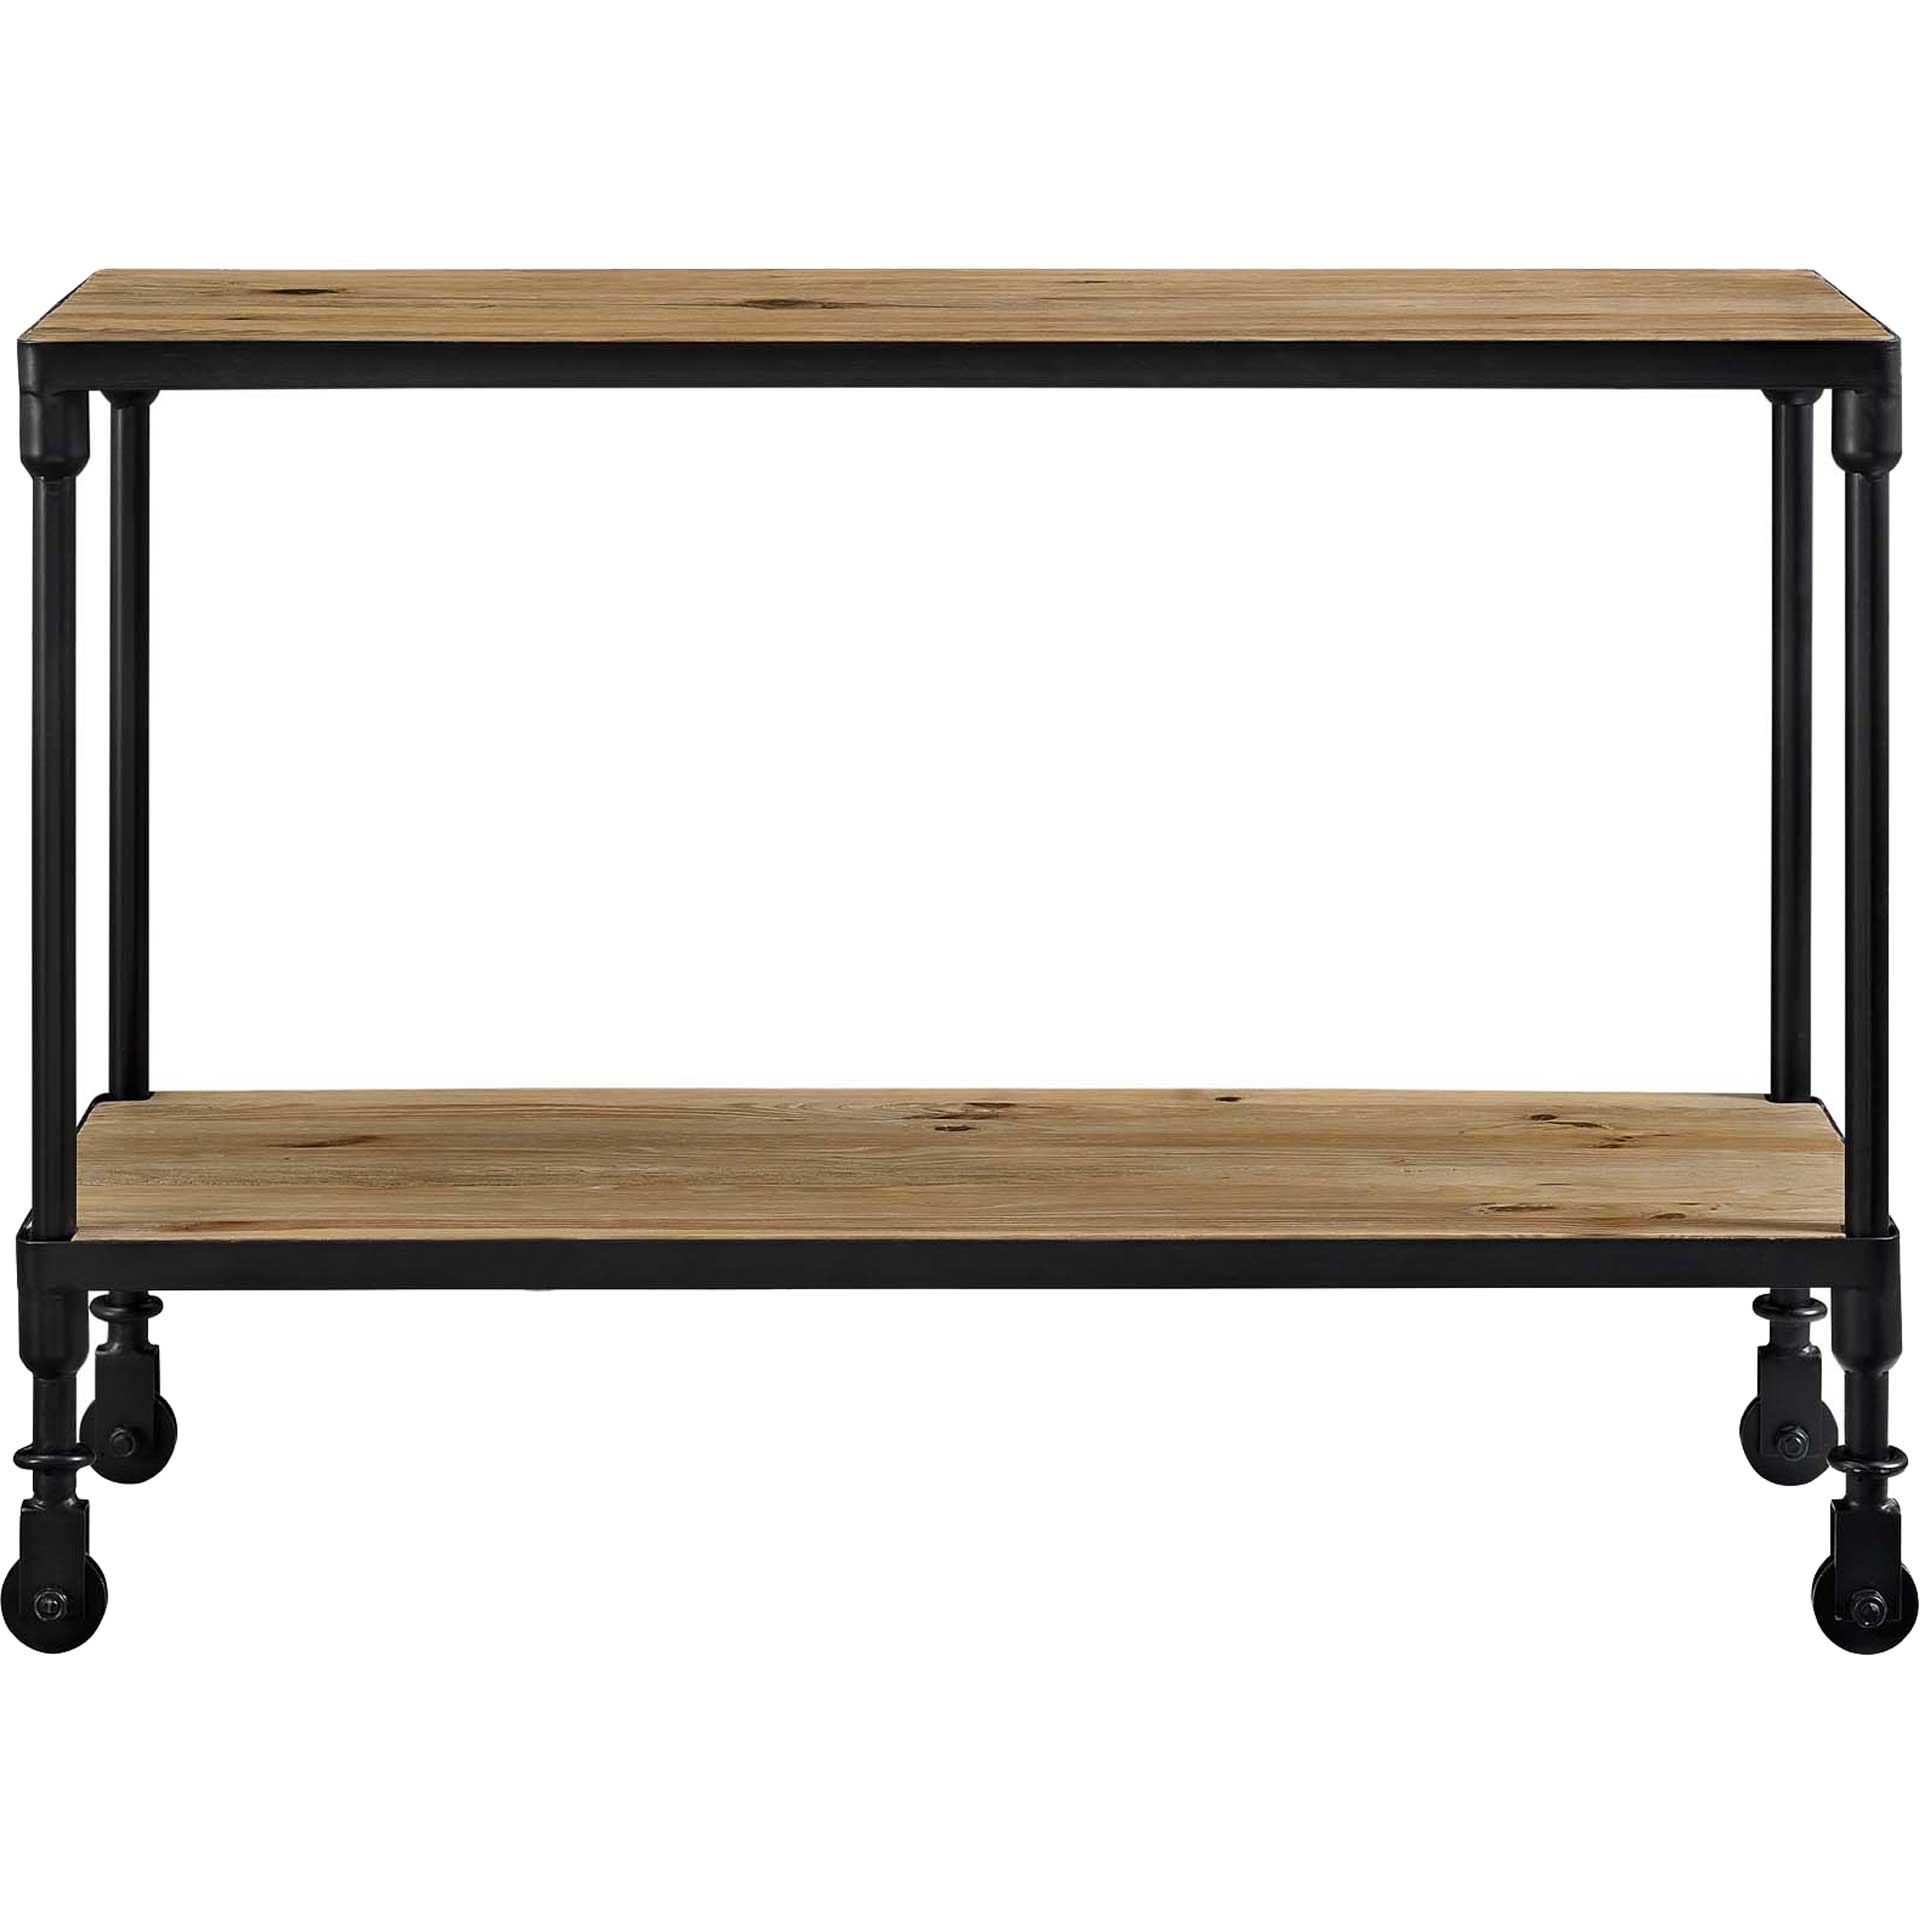 Roland 42" Wood TV Stand Brown